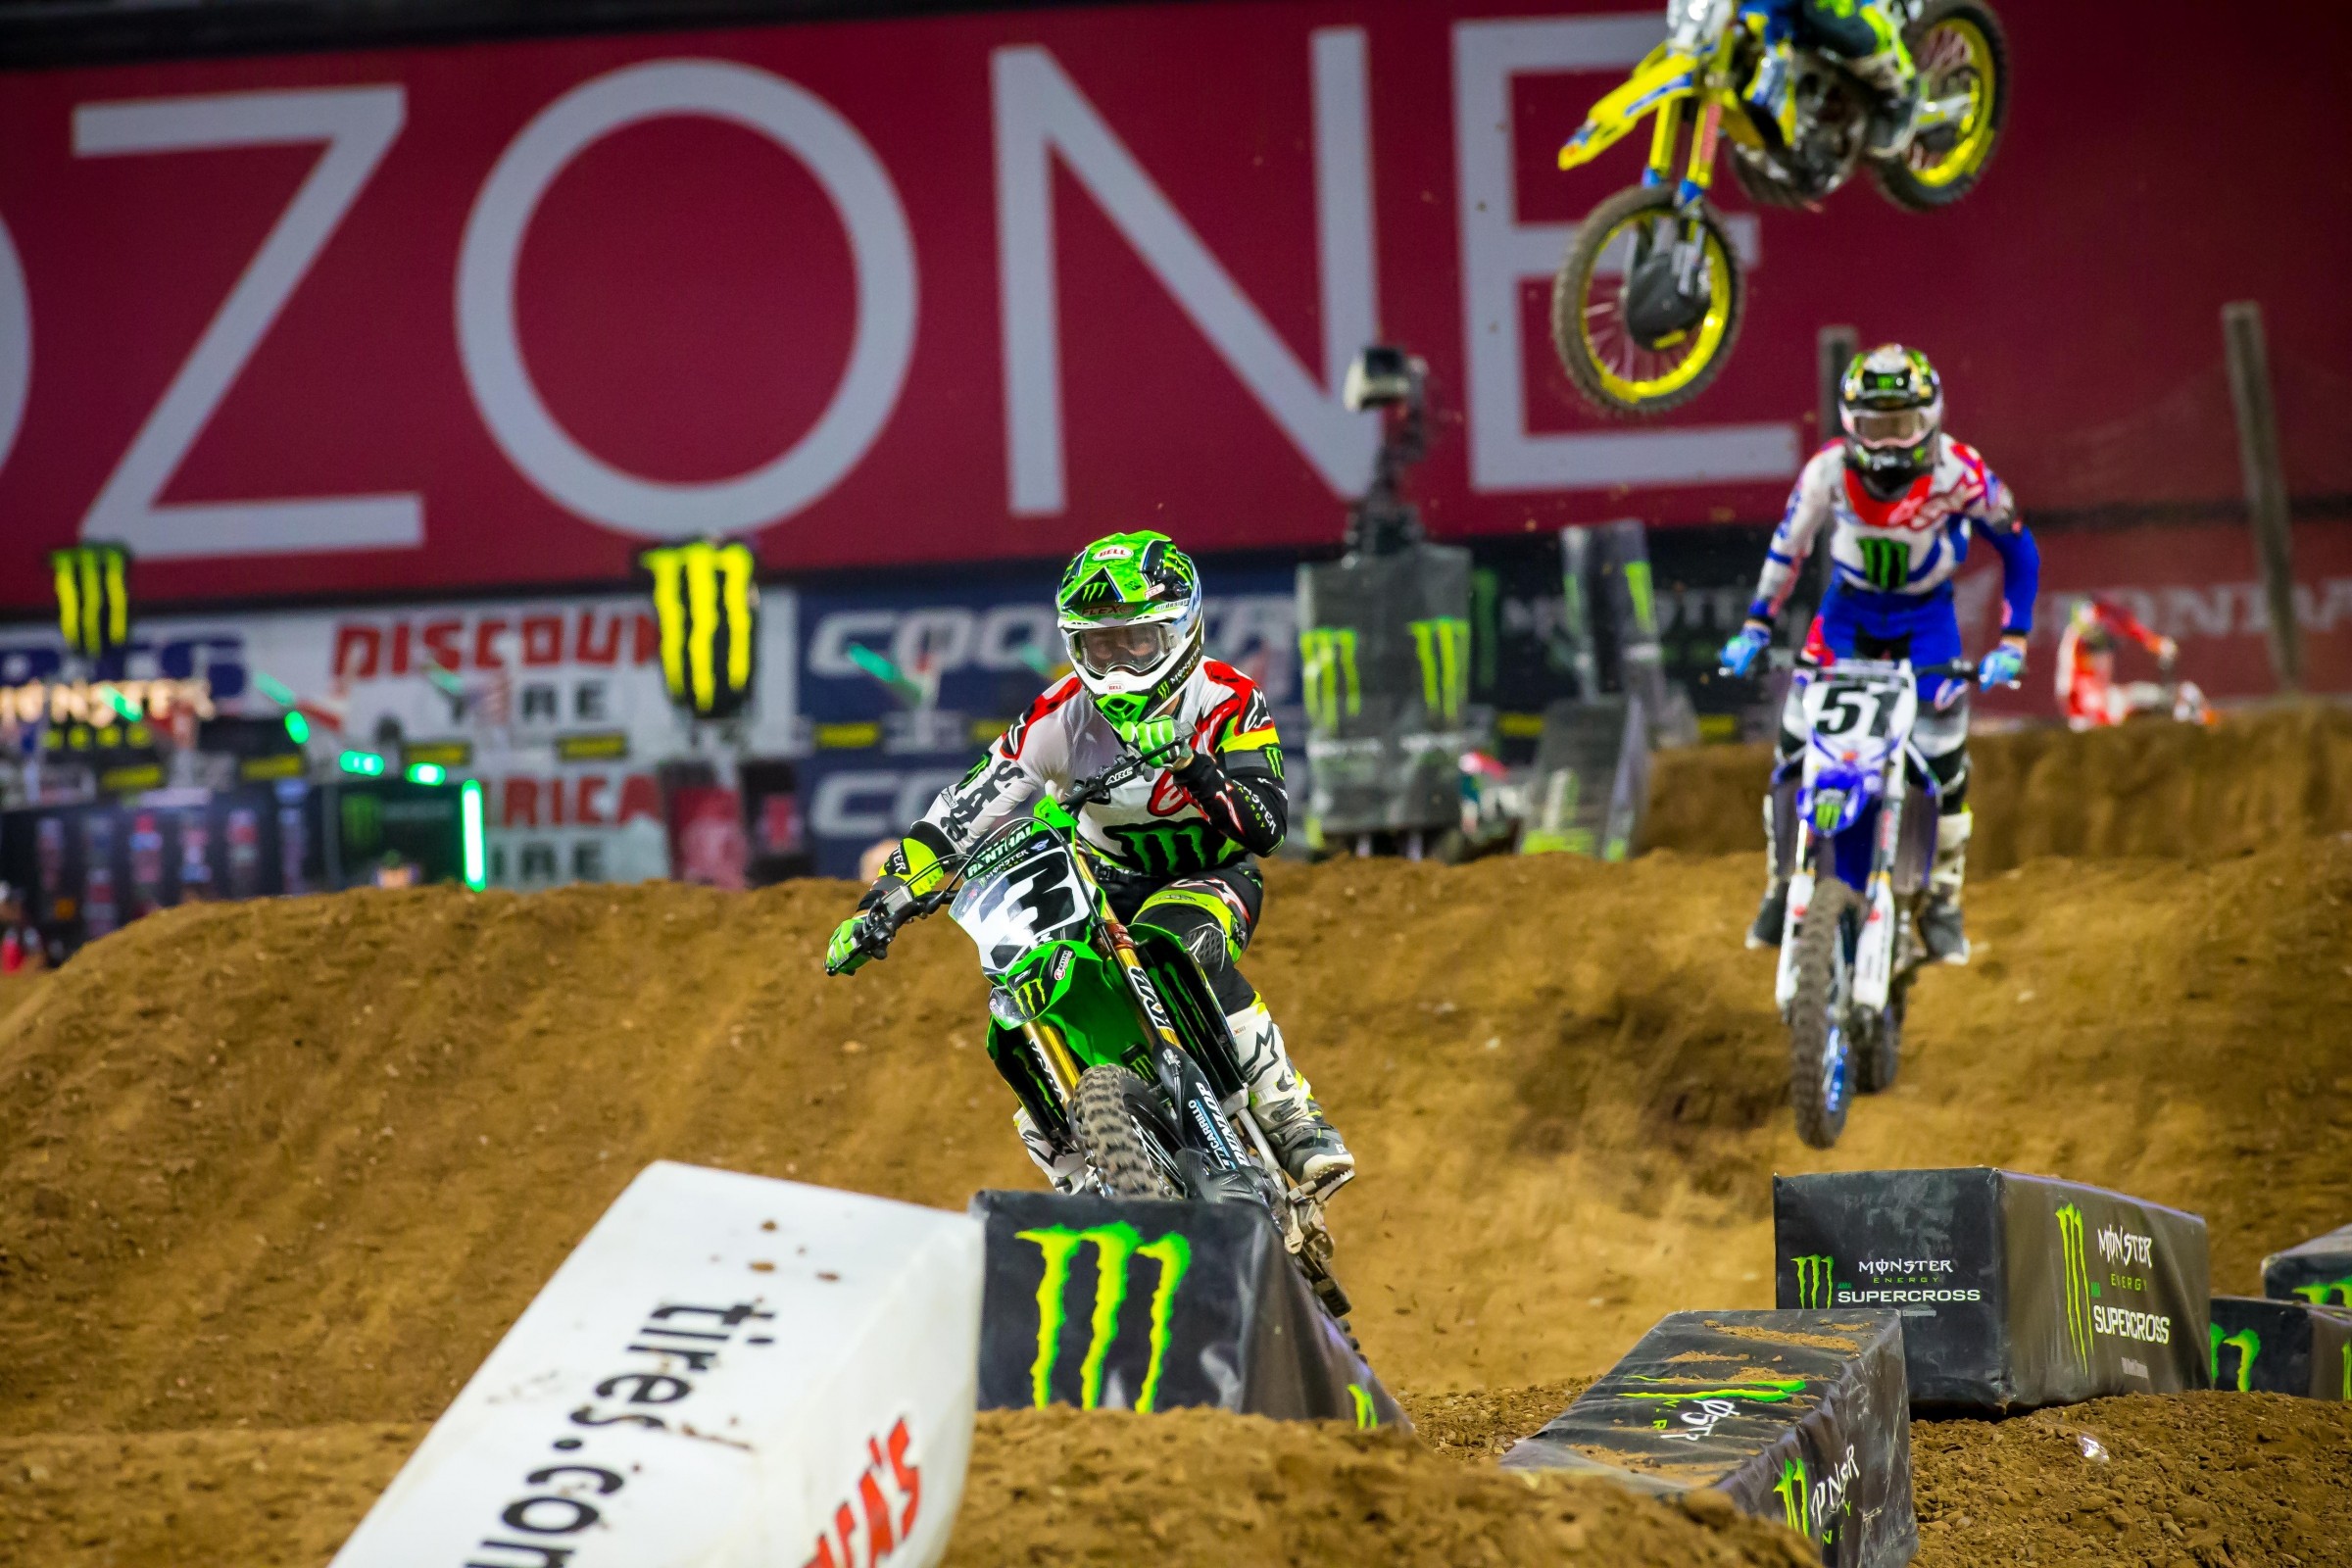 Observations from 2018 Glendale SX Supercross Racer X